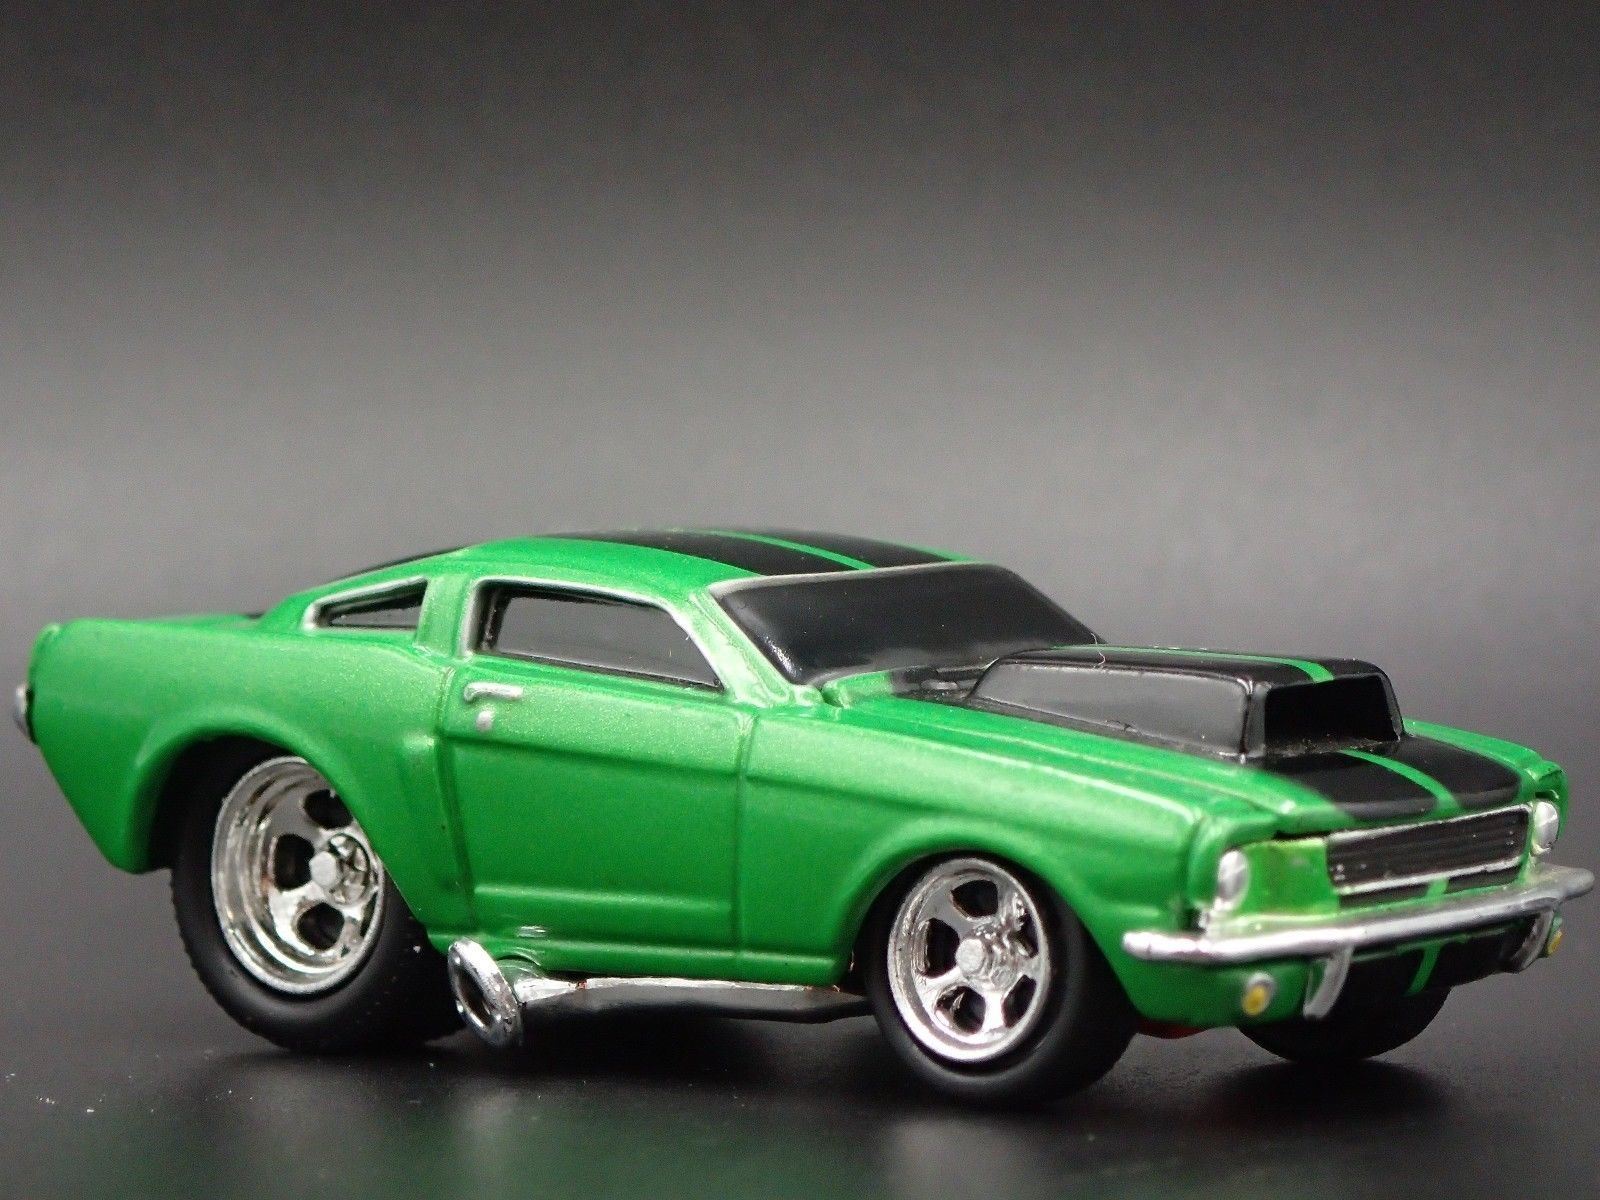 1966 66 FORD MUSTANG FASTBACK 1:64 SCALE COLLECTIBLE DIORAMA DIECAST MODEL CAR